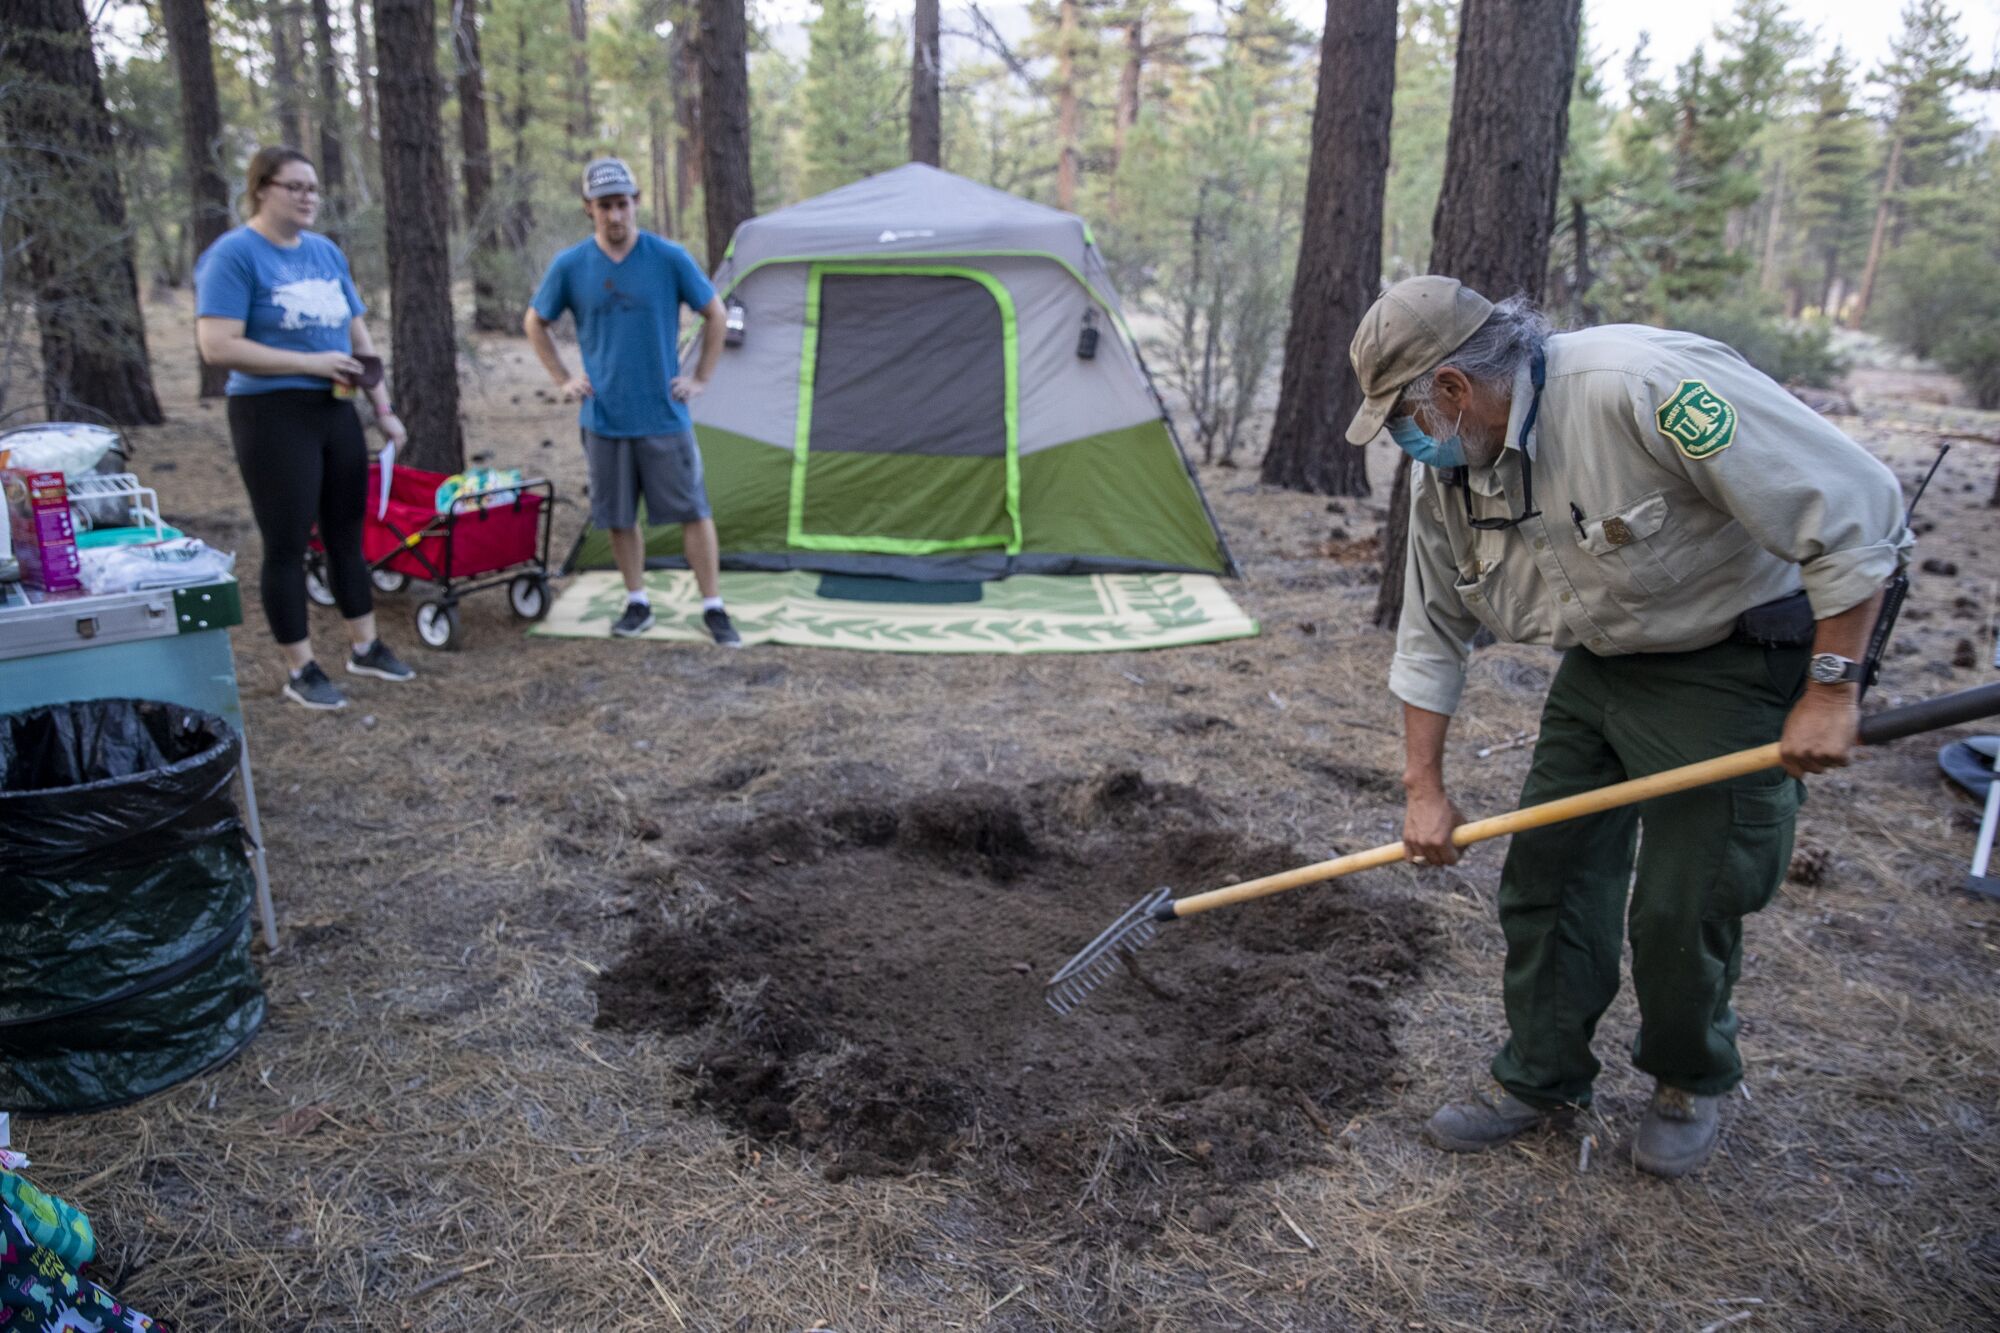 Forest protection officer Chon Bribiescas, right, remove needles as campers Coree, left, and Andrew Dewlaney watch.